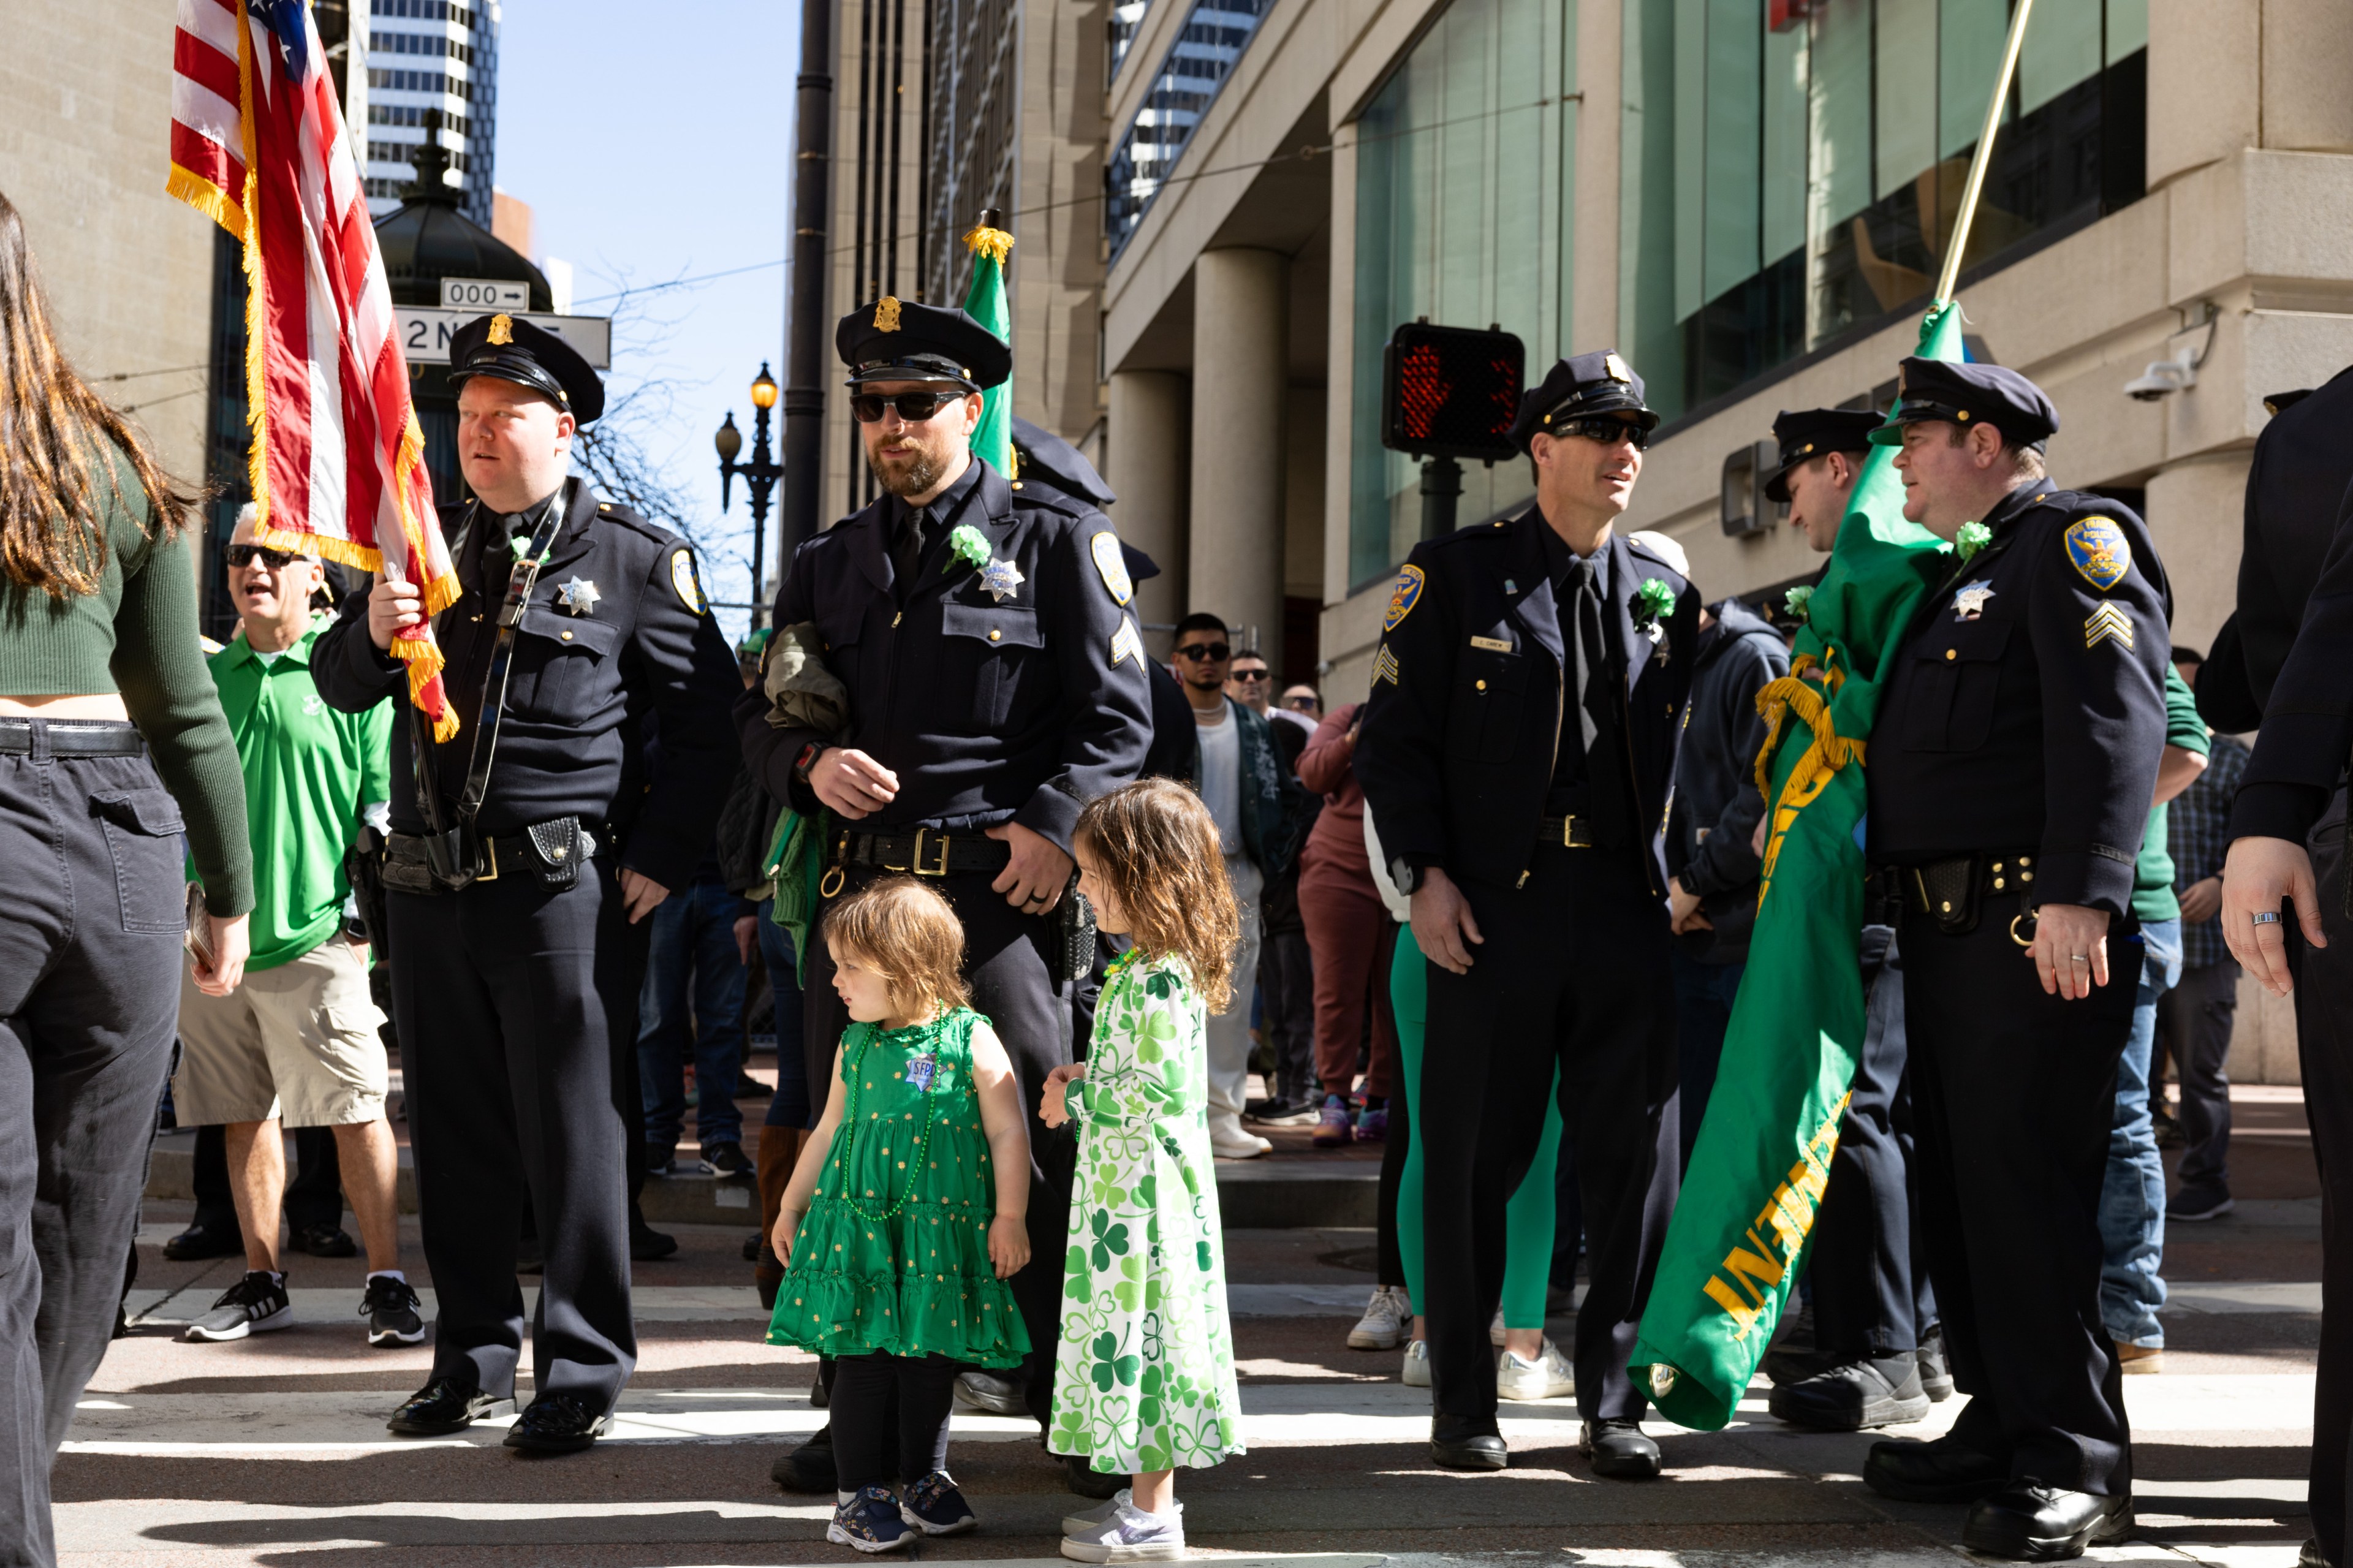 Police and children at the St. Patrick's Day Parade in San Francisco